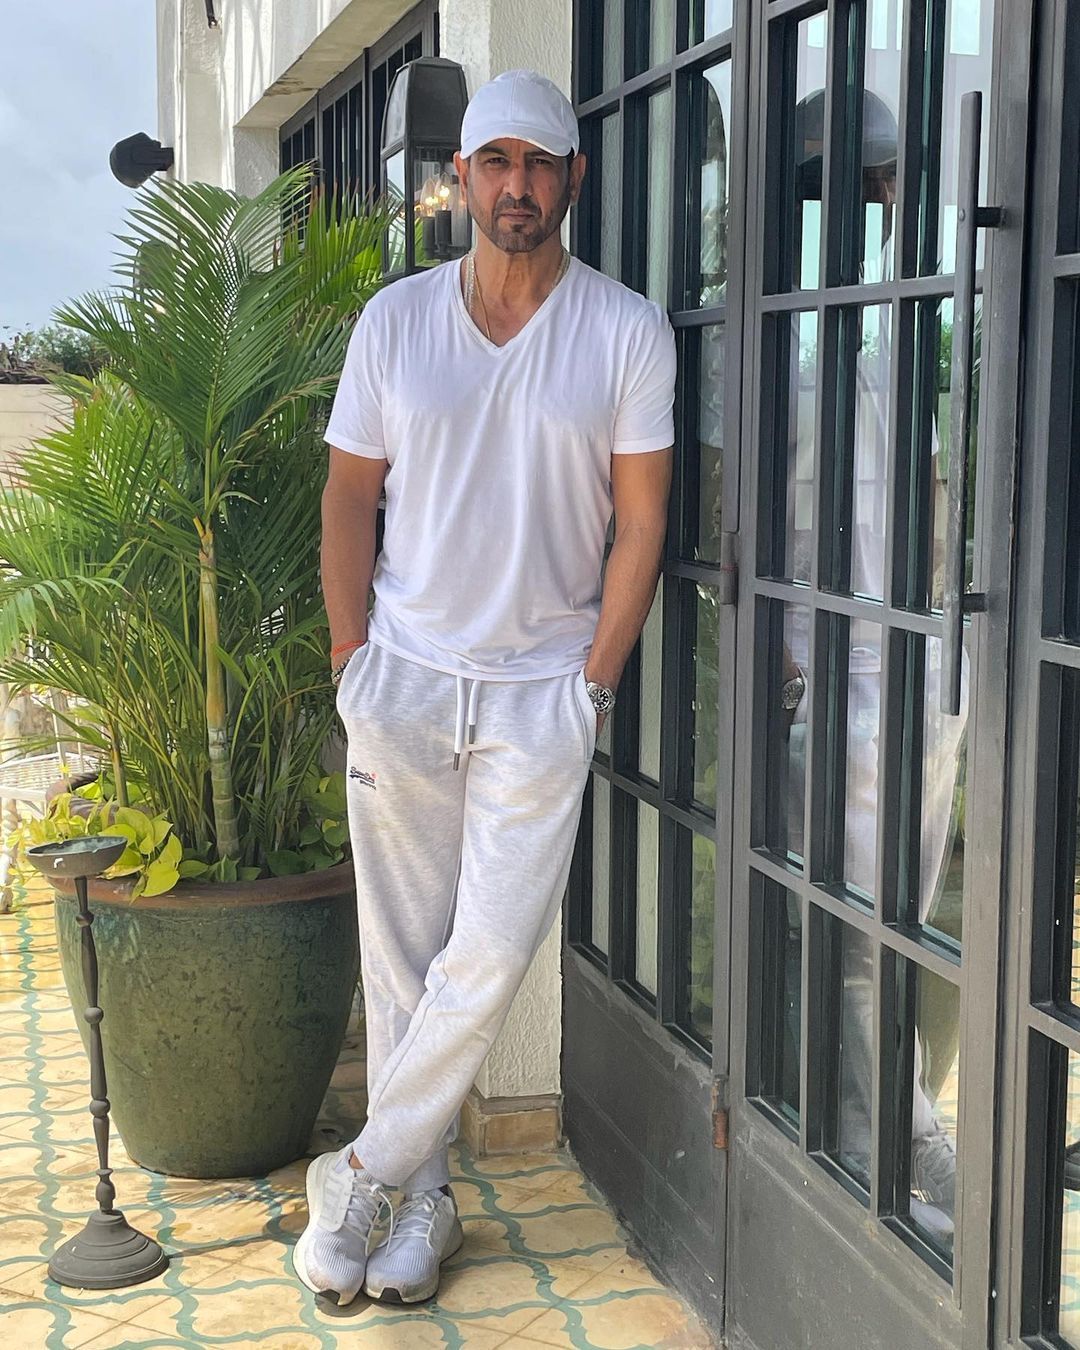 Ronit Boseroy says his 'brain died' doing the same things on TV: "The money was terrific but I felt I was dying as an actor"